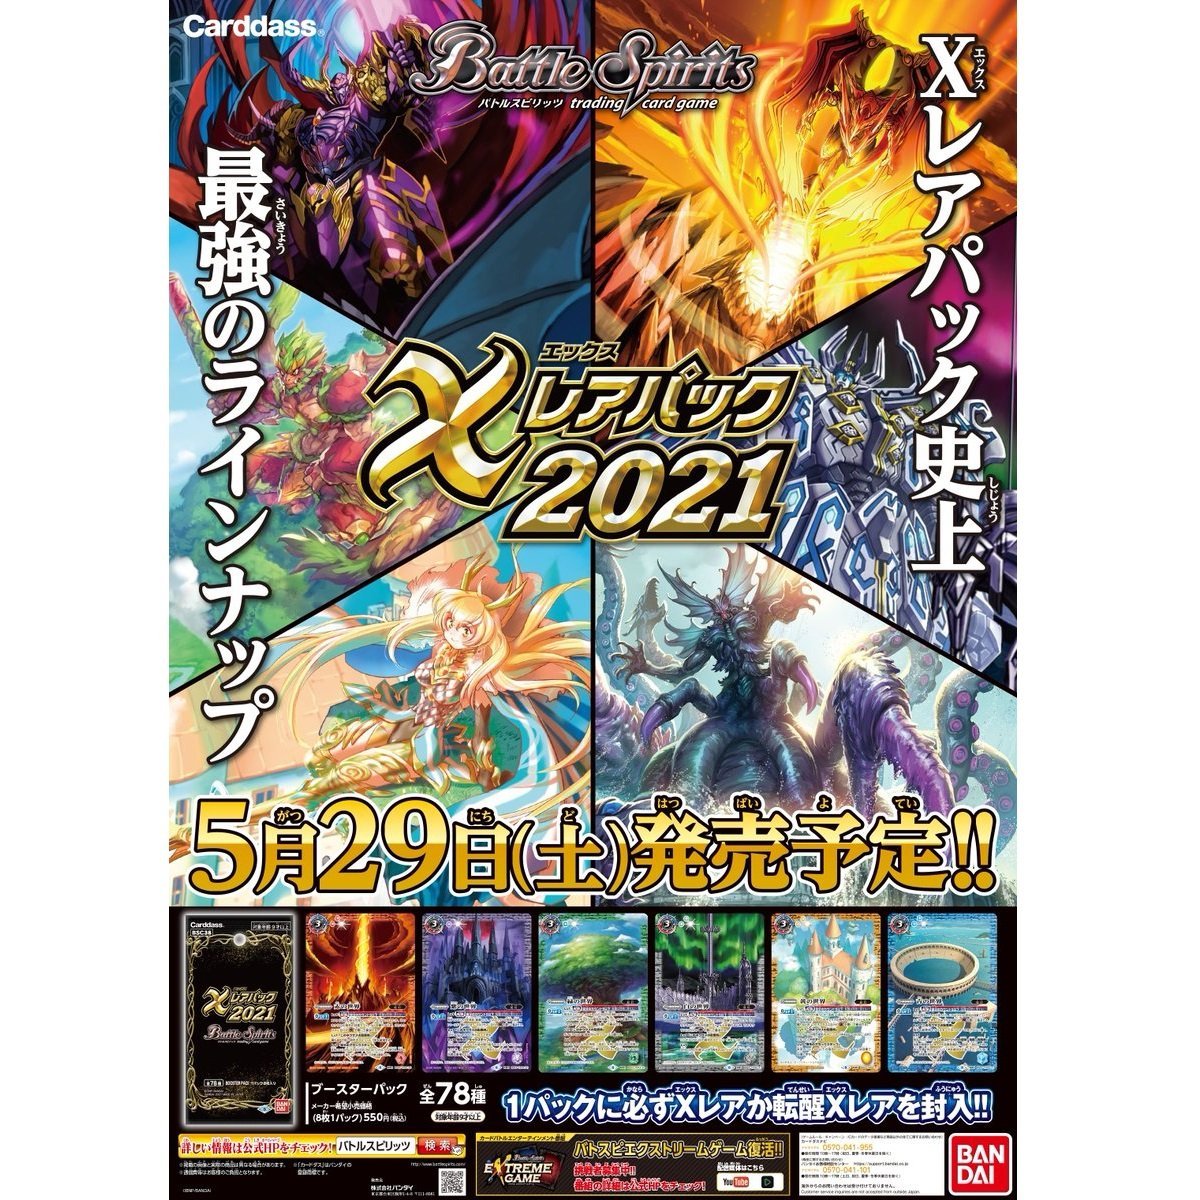 Battle Spirits Booster - X Rare Pack 2021 [BSC38]-Single Pack (Random)-Bandai-Ace Cards & Collectibles